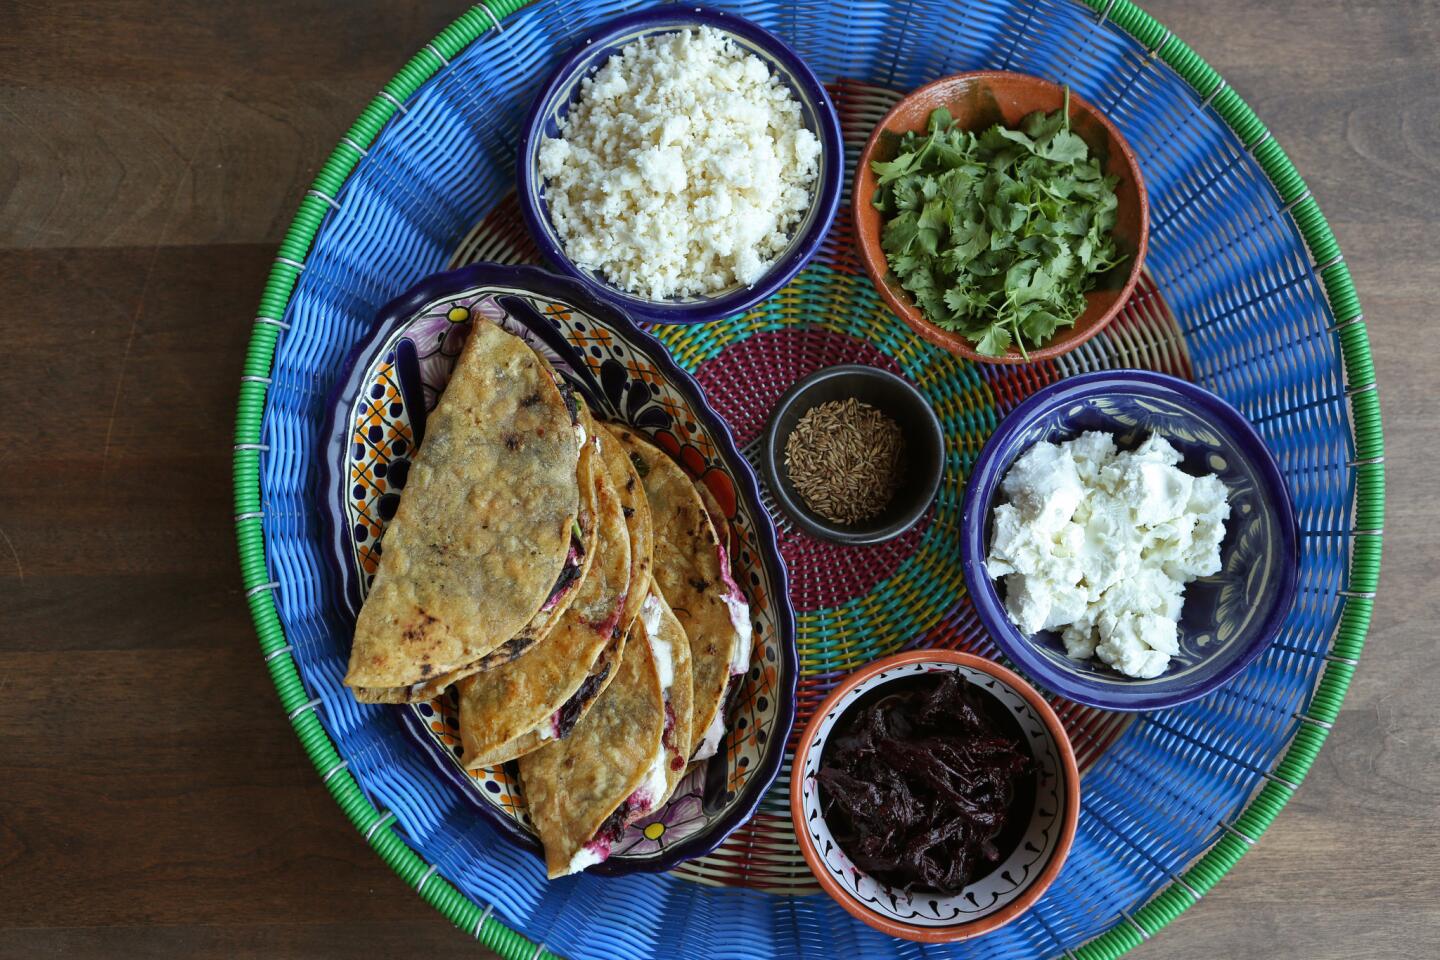 Quesadillas made with queso fresco, goat cheese, cilantro, cumin seeds and hibiscus braised in chicken broth and chipotle chili.